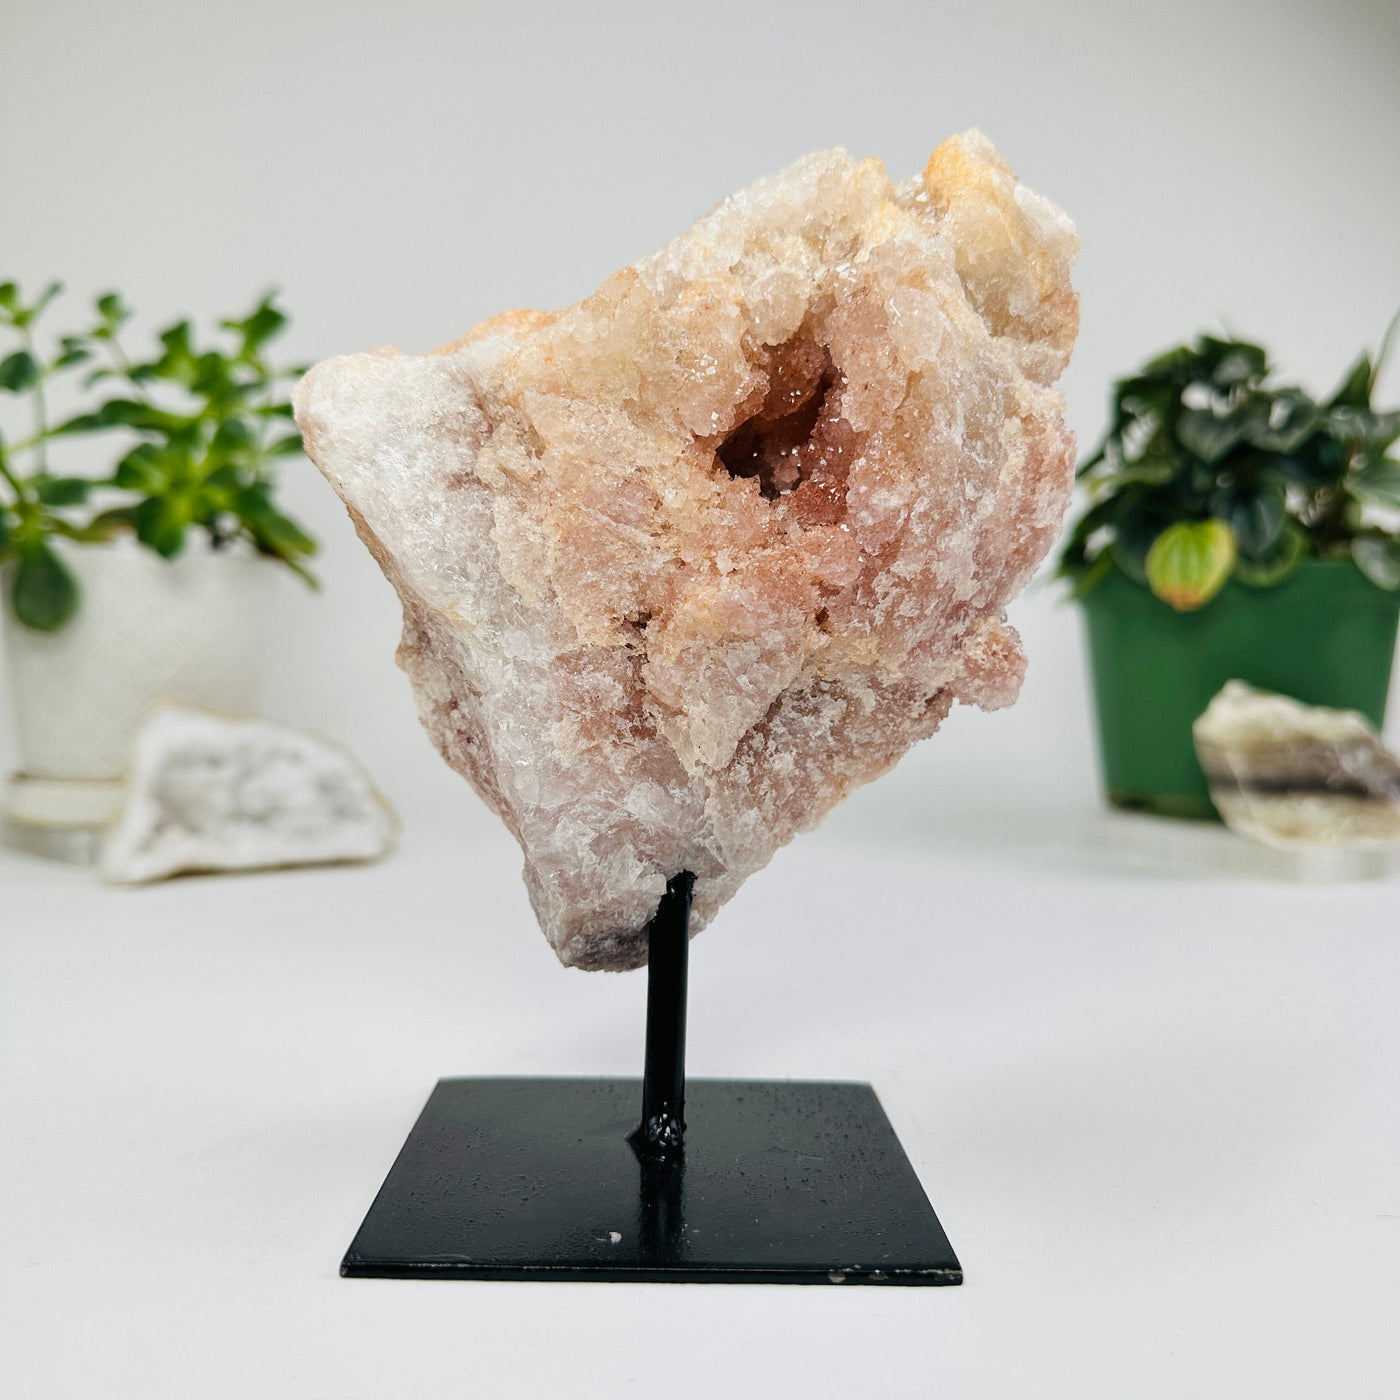 Pink amethyst on metal stand with decorations in the background